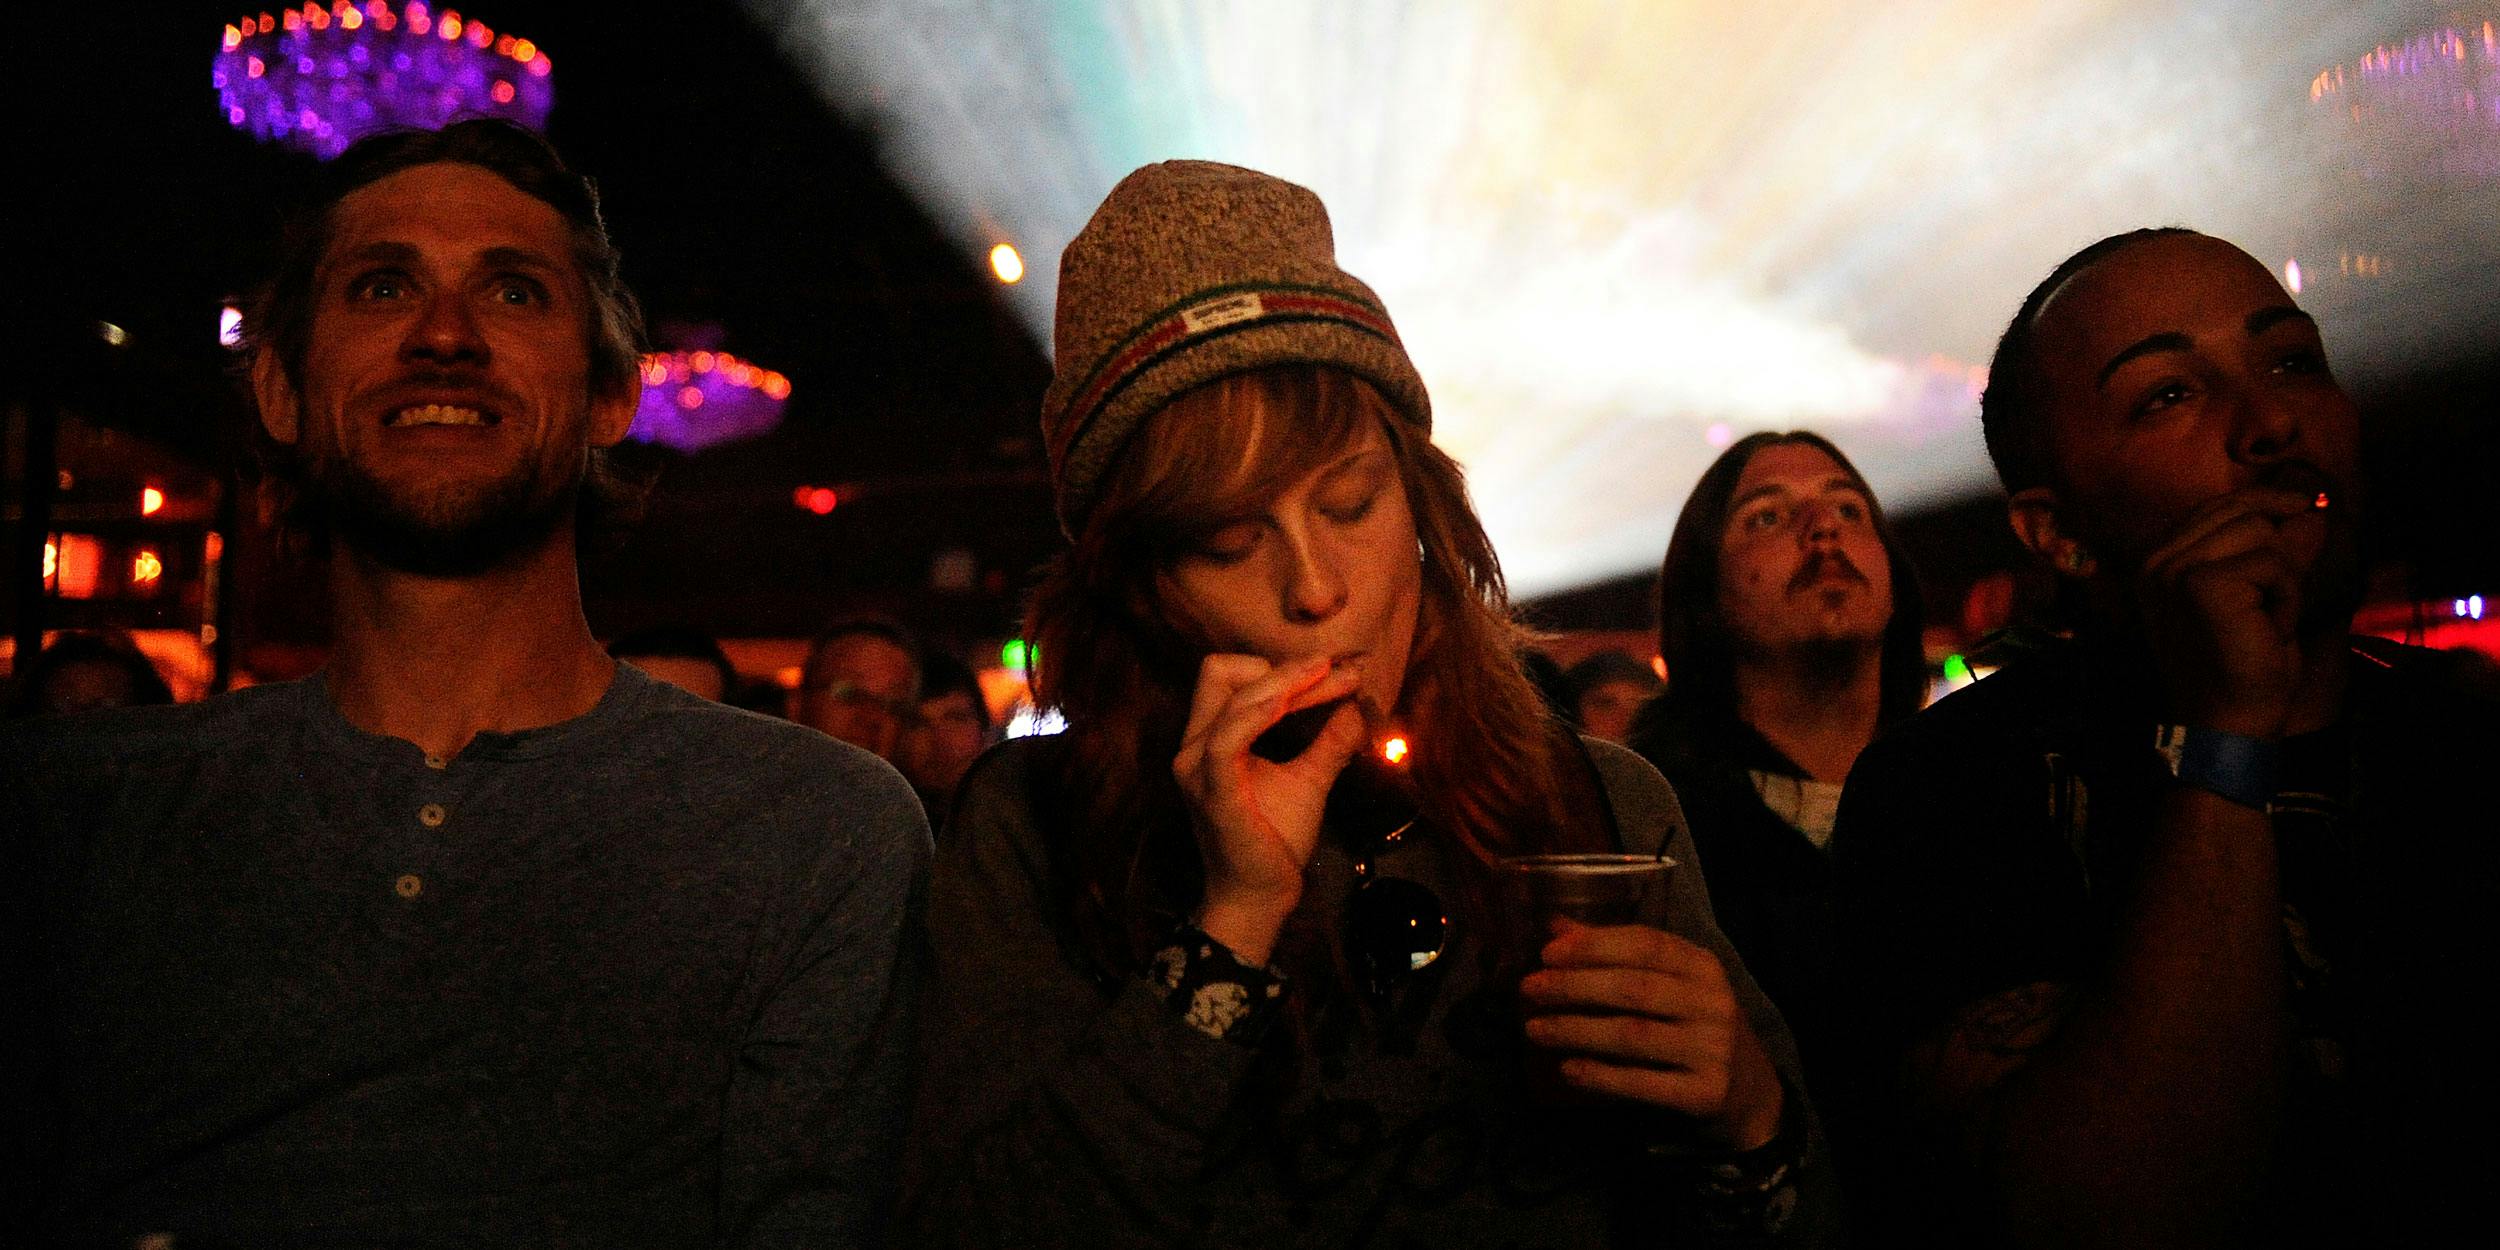 Caiti Beckwith of Denver, Colorado smokes a joint while watching the Snoop Lion documentary Reincarnated during the first ever "Green Carpet" event as a part of the High Times US Cannabis Cup at the Fillmore Auditorium on April 19, 2013 in Denver, Colorado. While cannabis is legal in Colorado and other states, it's still not permitted at most events. Outside Lands in California just announced it will be welcoming Cailfornia's cannabis industry with an education section called "Grass Lands."